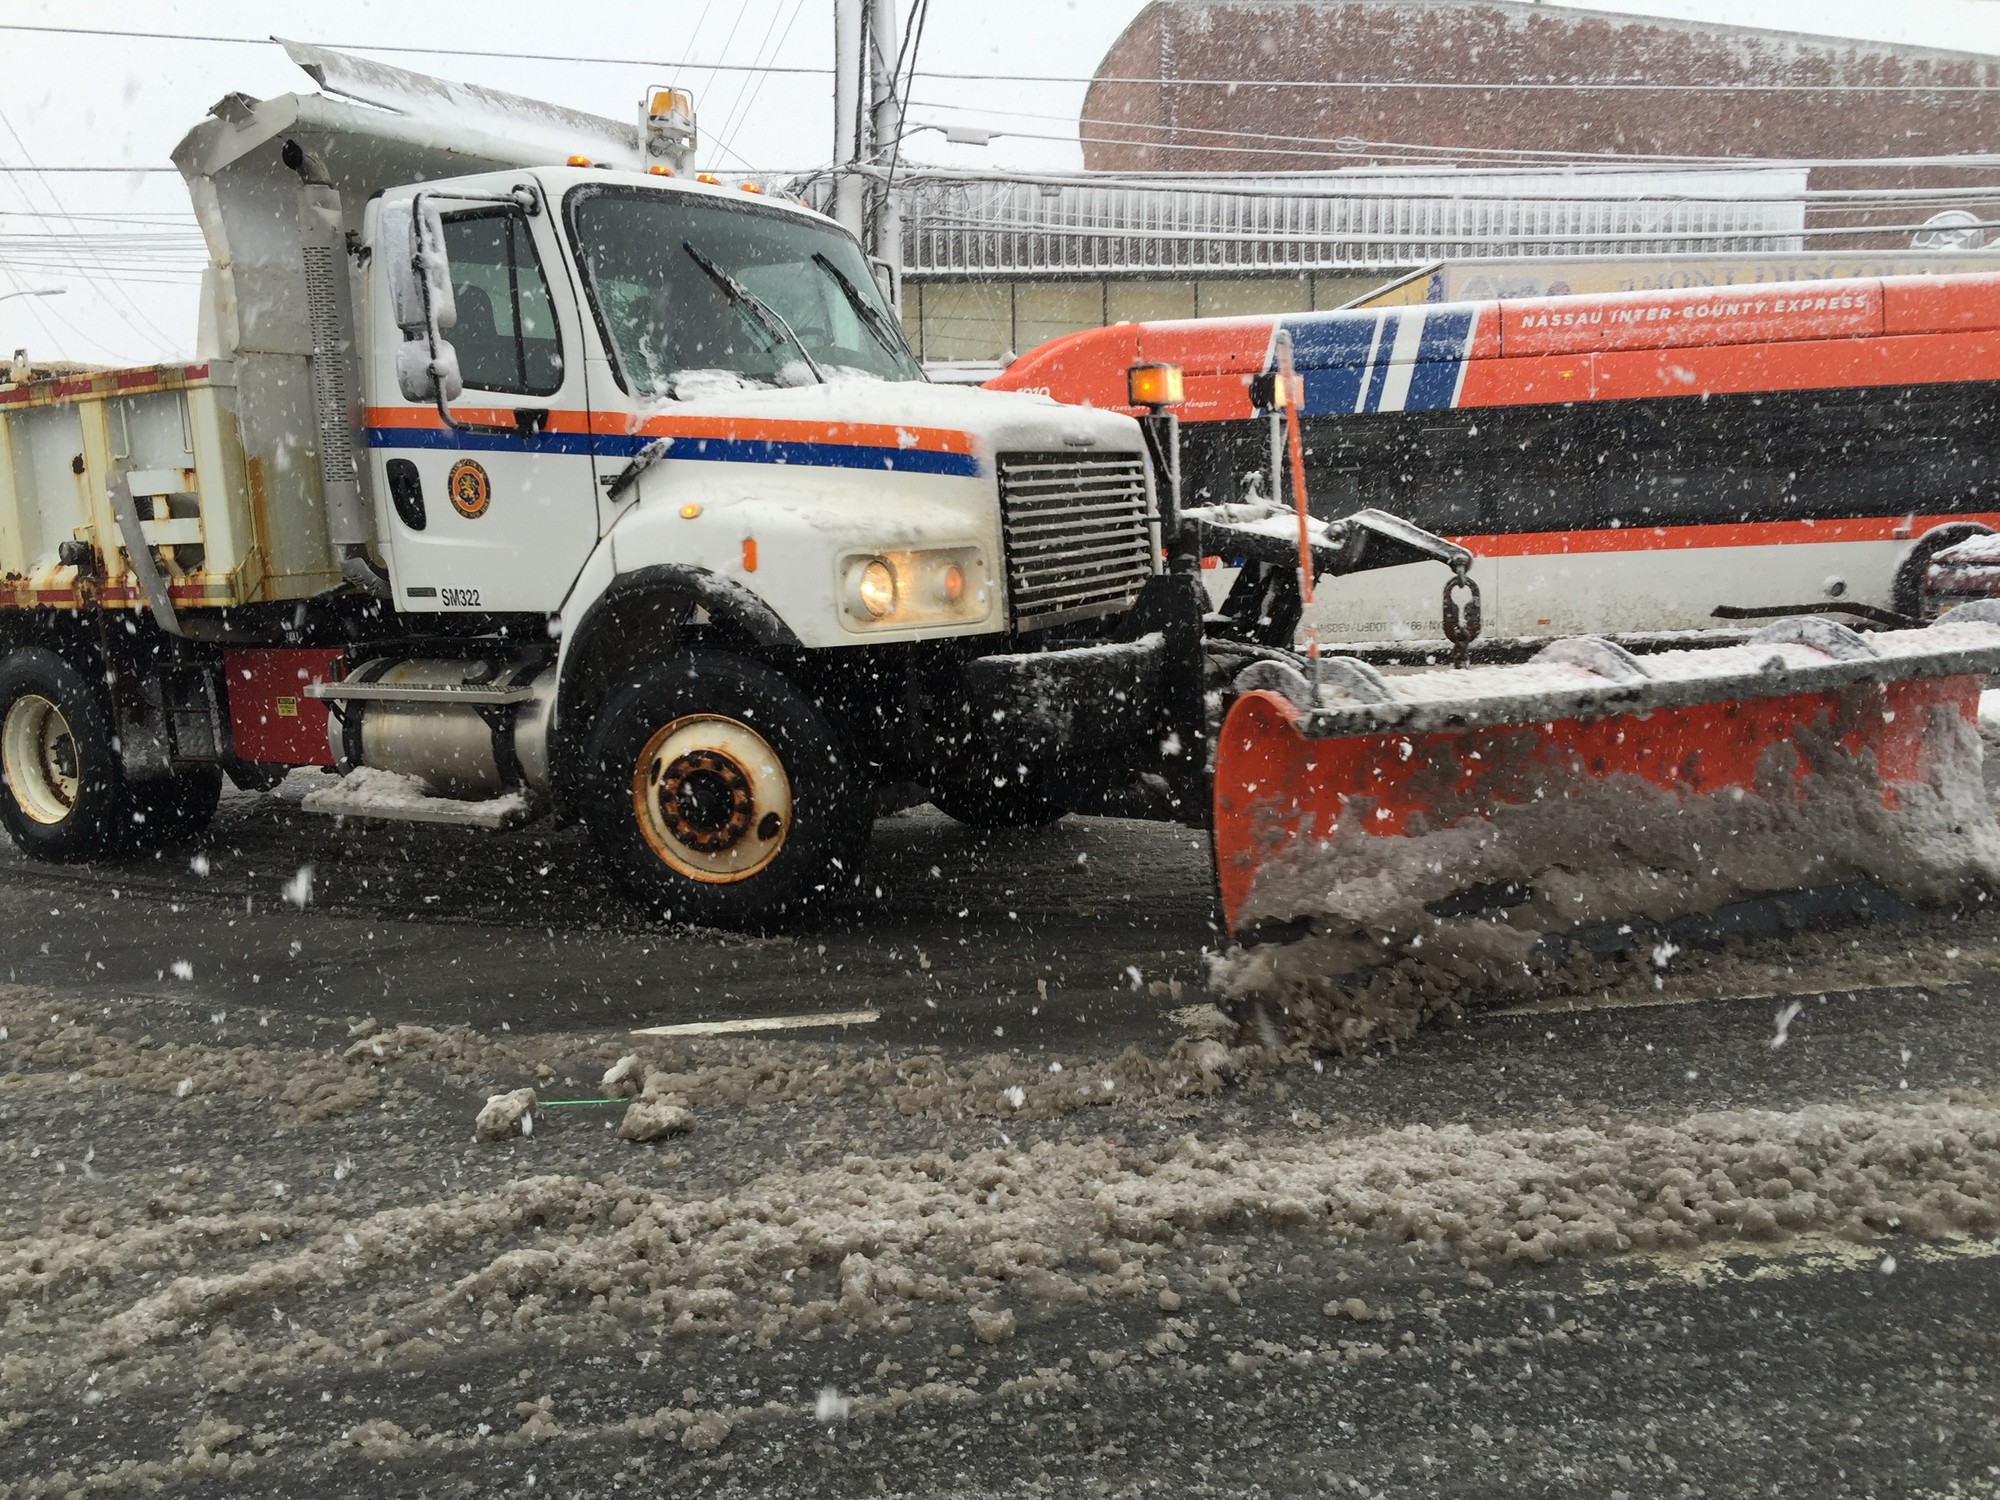 Nassauy County trucks are plowing snow throughout the area.